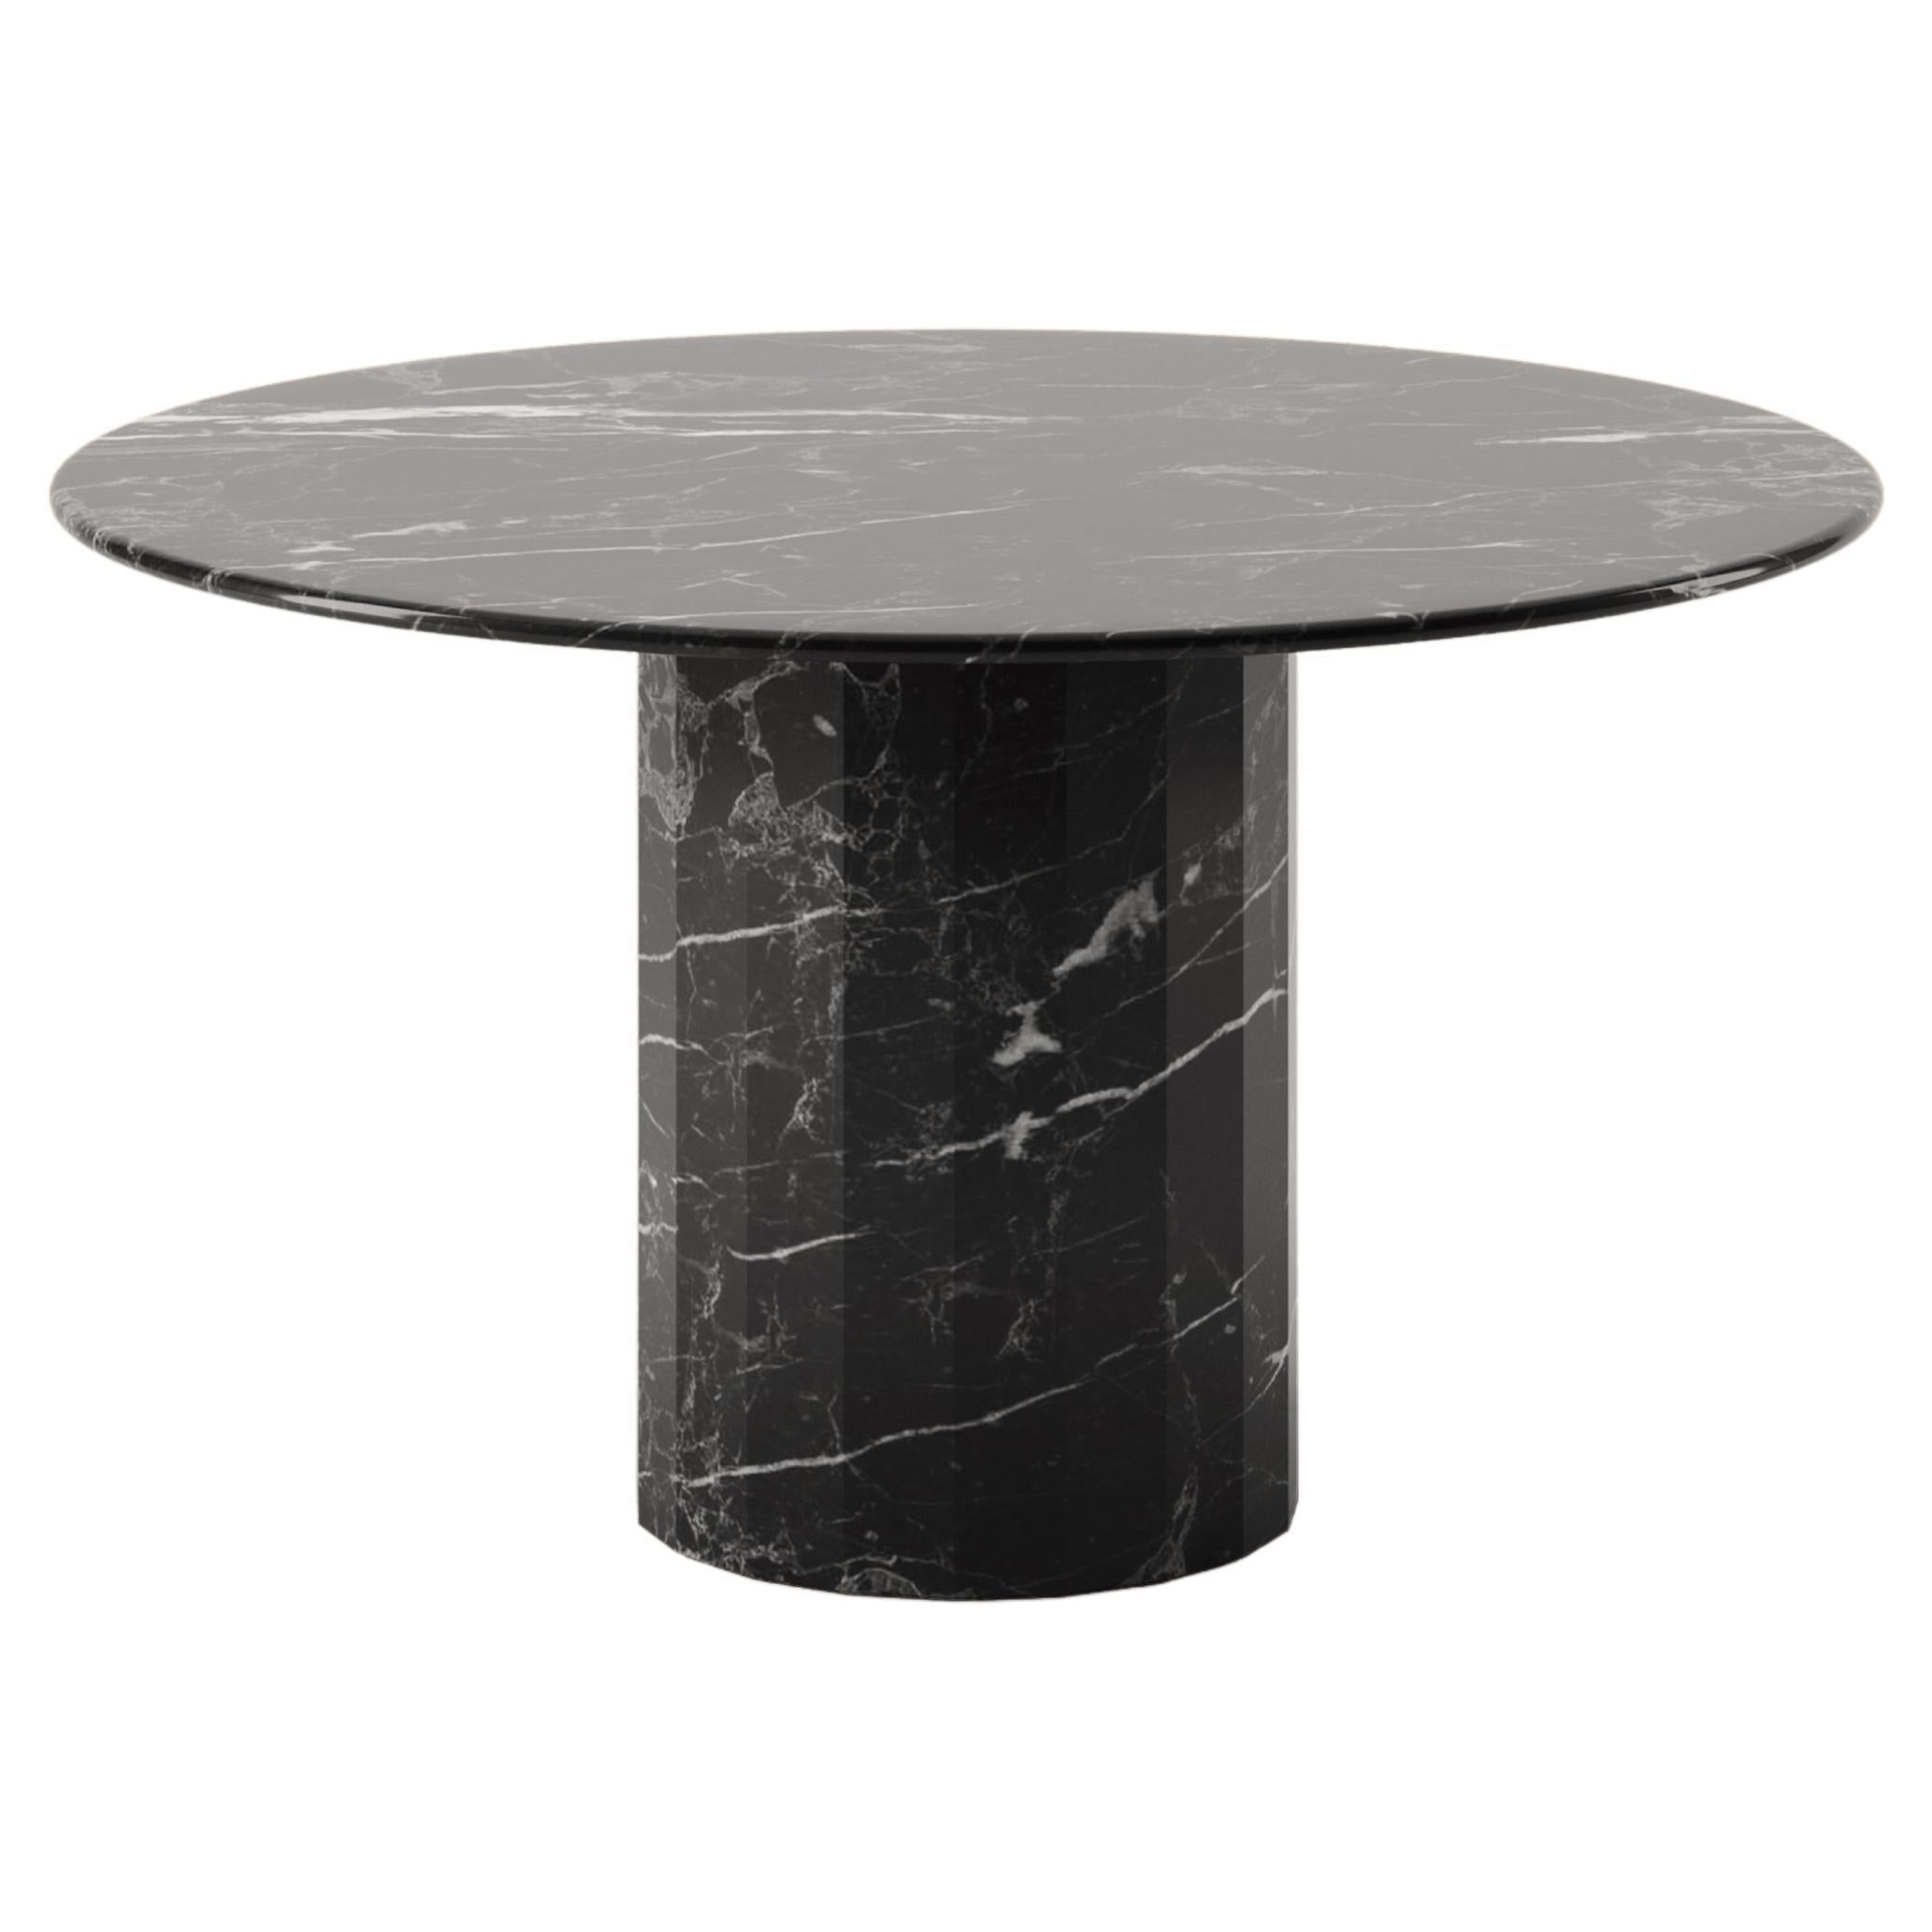 Ashby Round Dining/Hall Table Handcrafted in Polished Via Lactea Granite